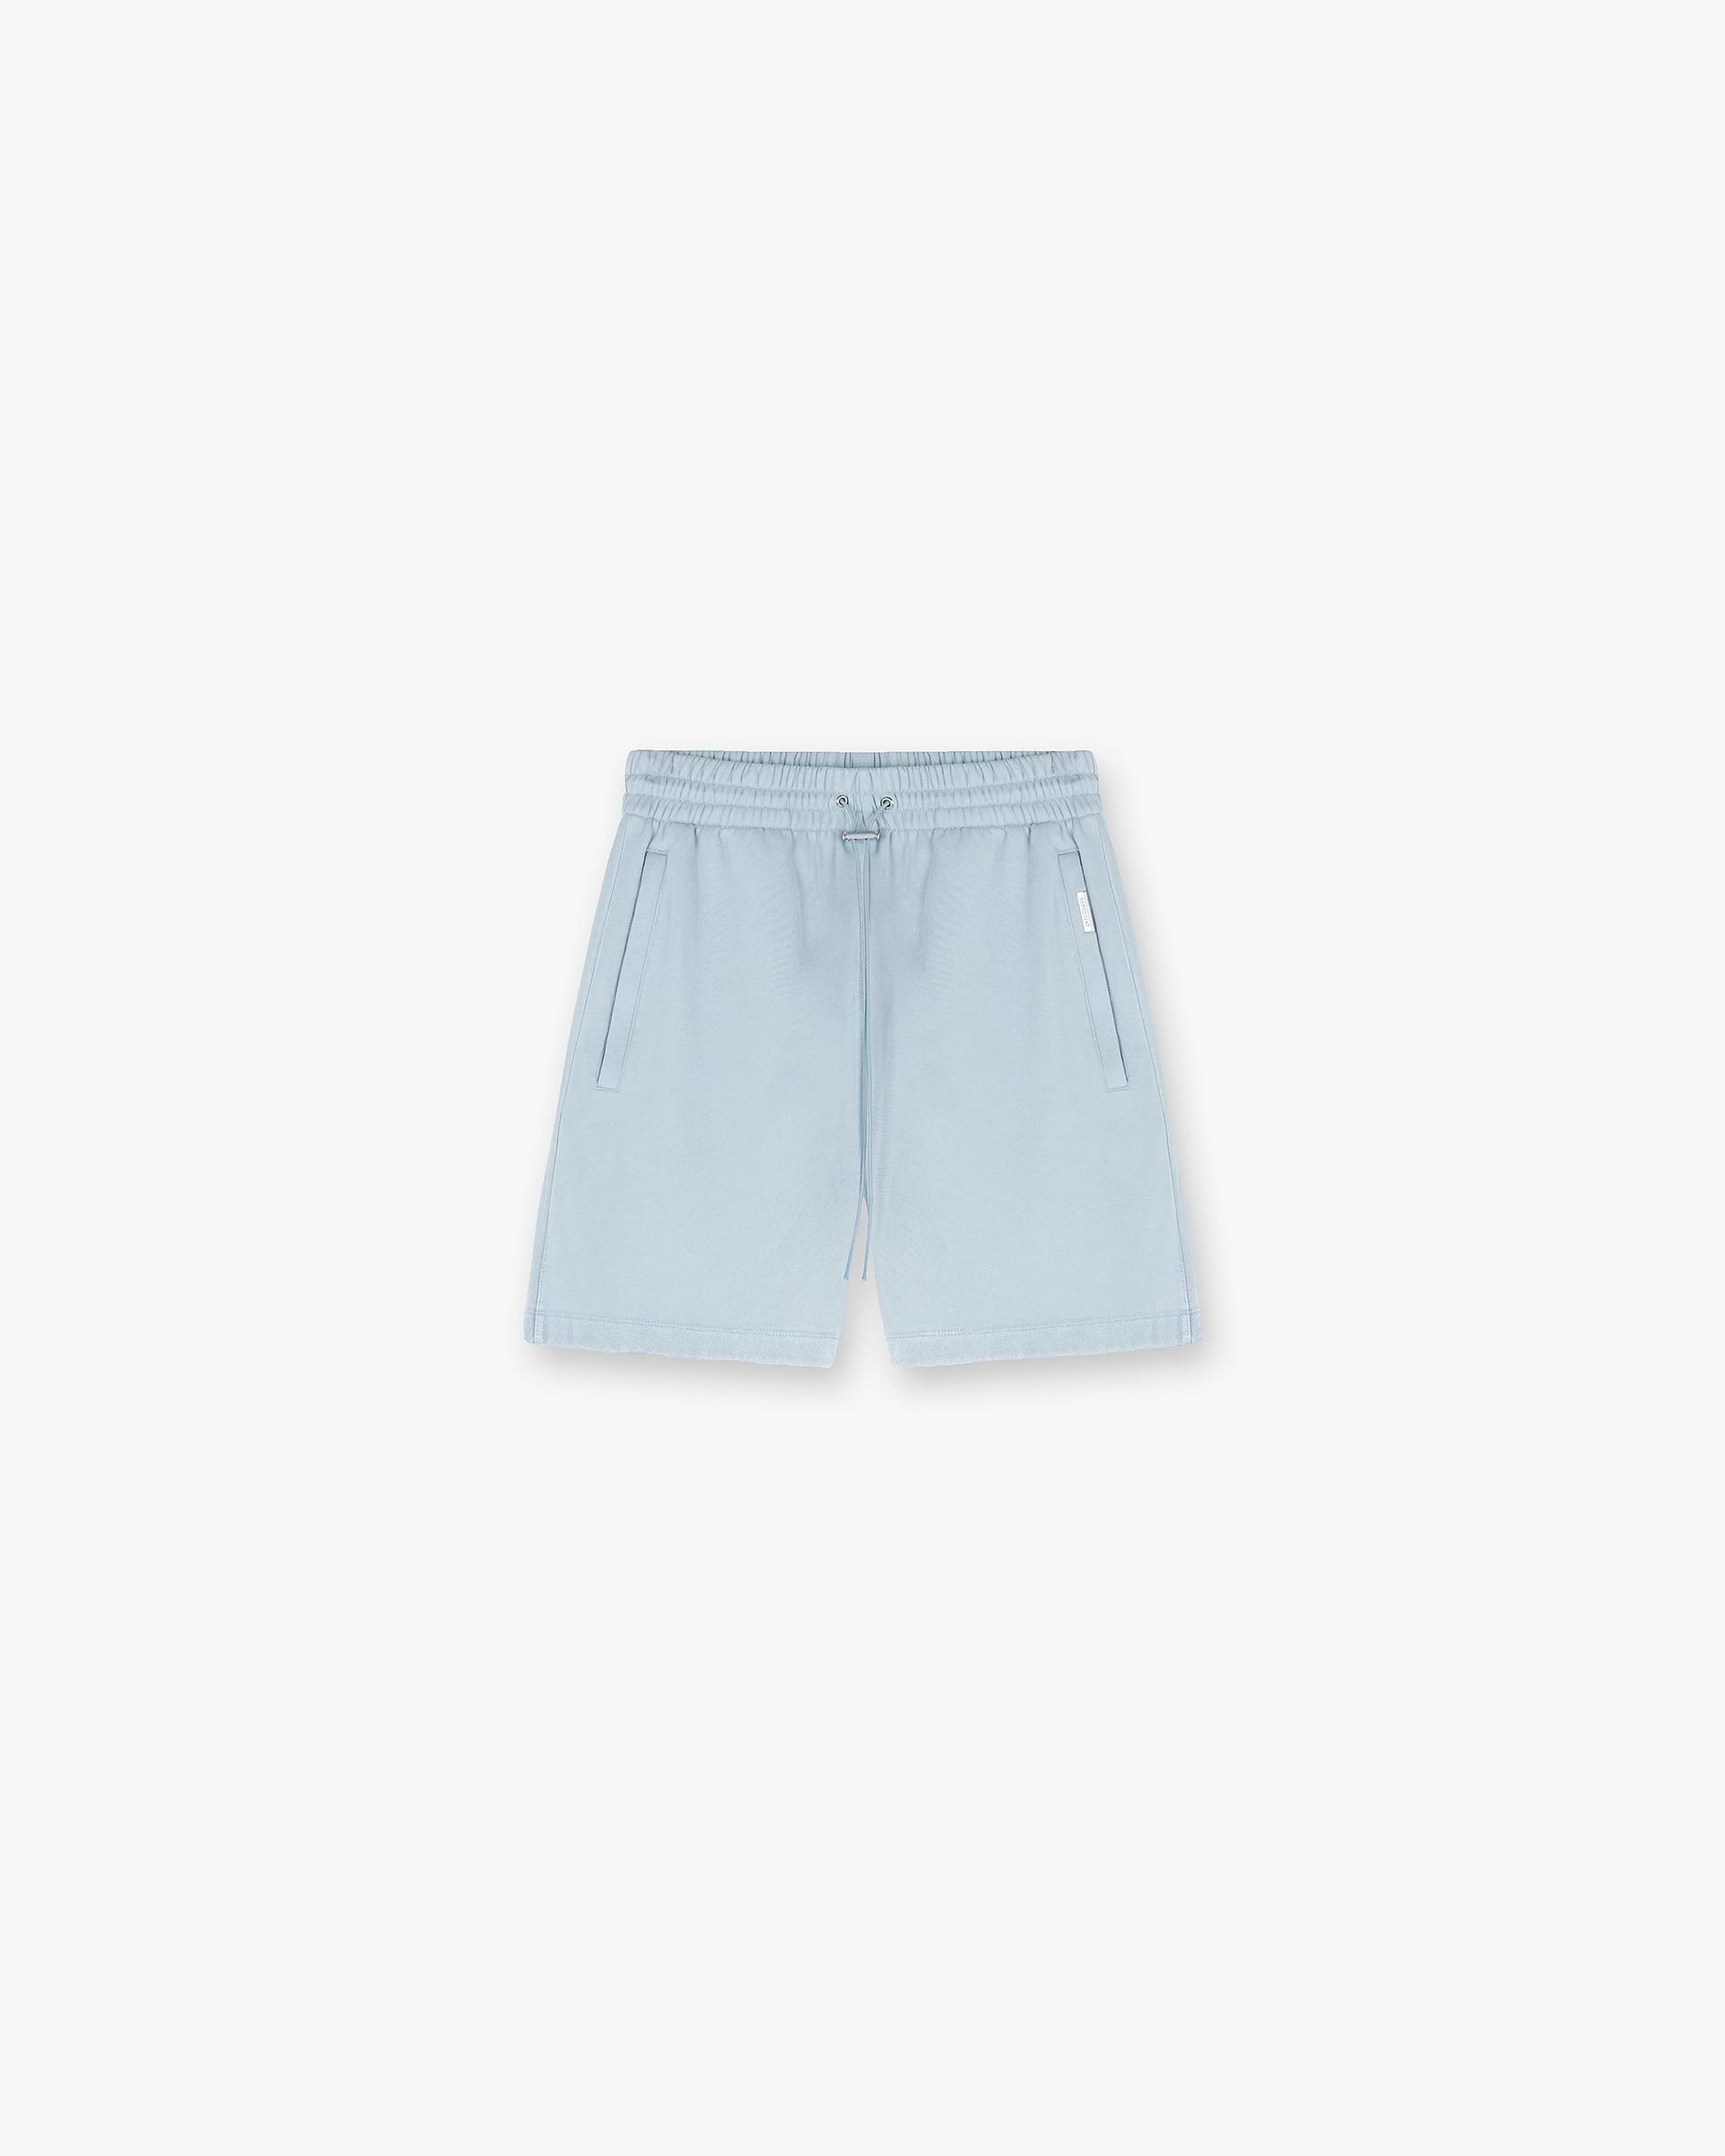 Blank Shorts | Washed Blue | Represent Clo